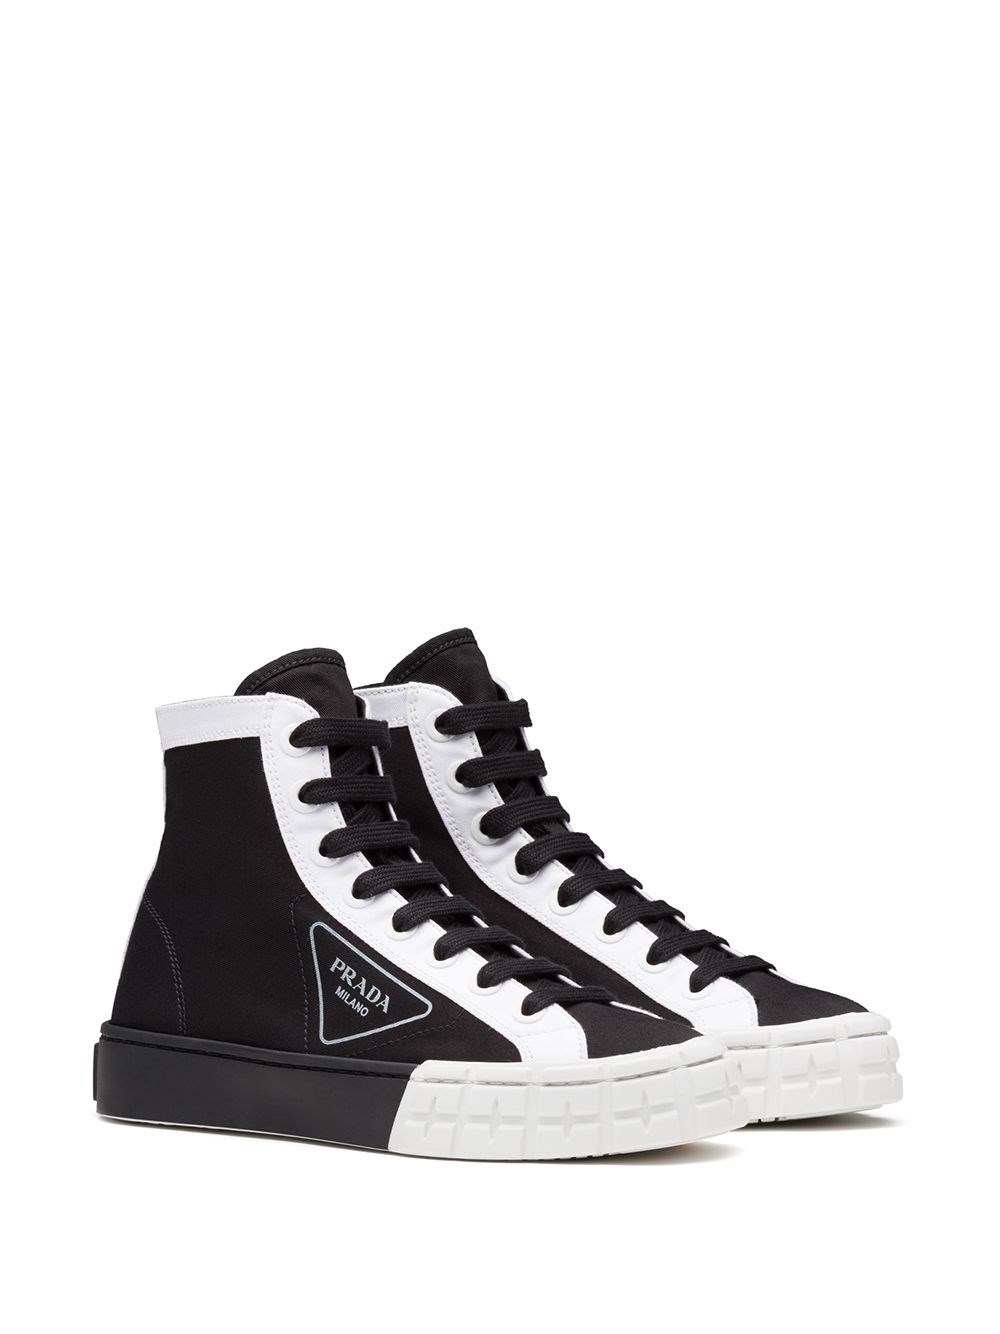 prada HIGH TOP LOGO SNEAKERS available on  - 32546